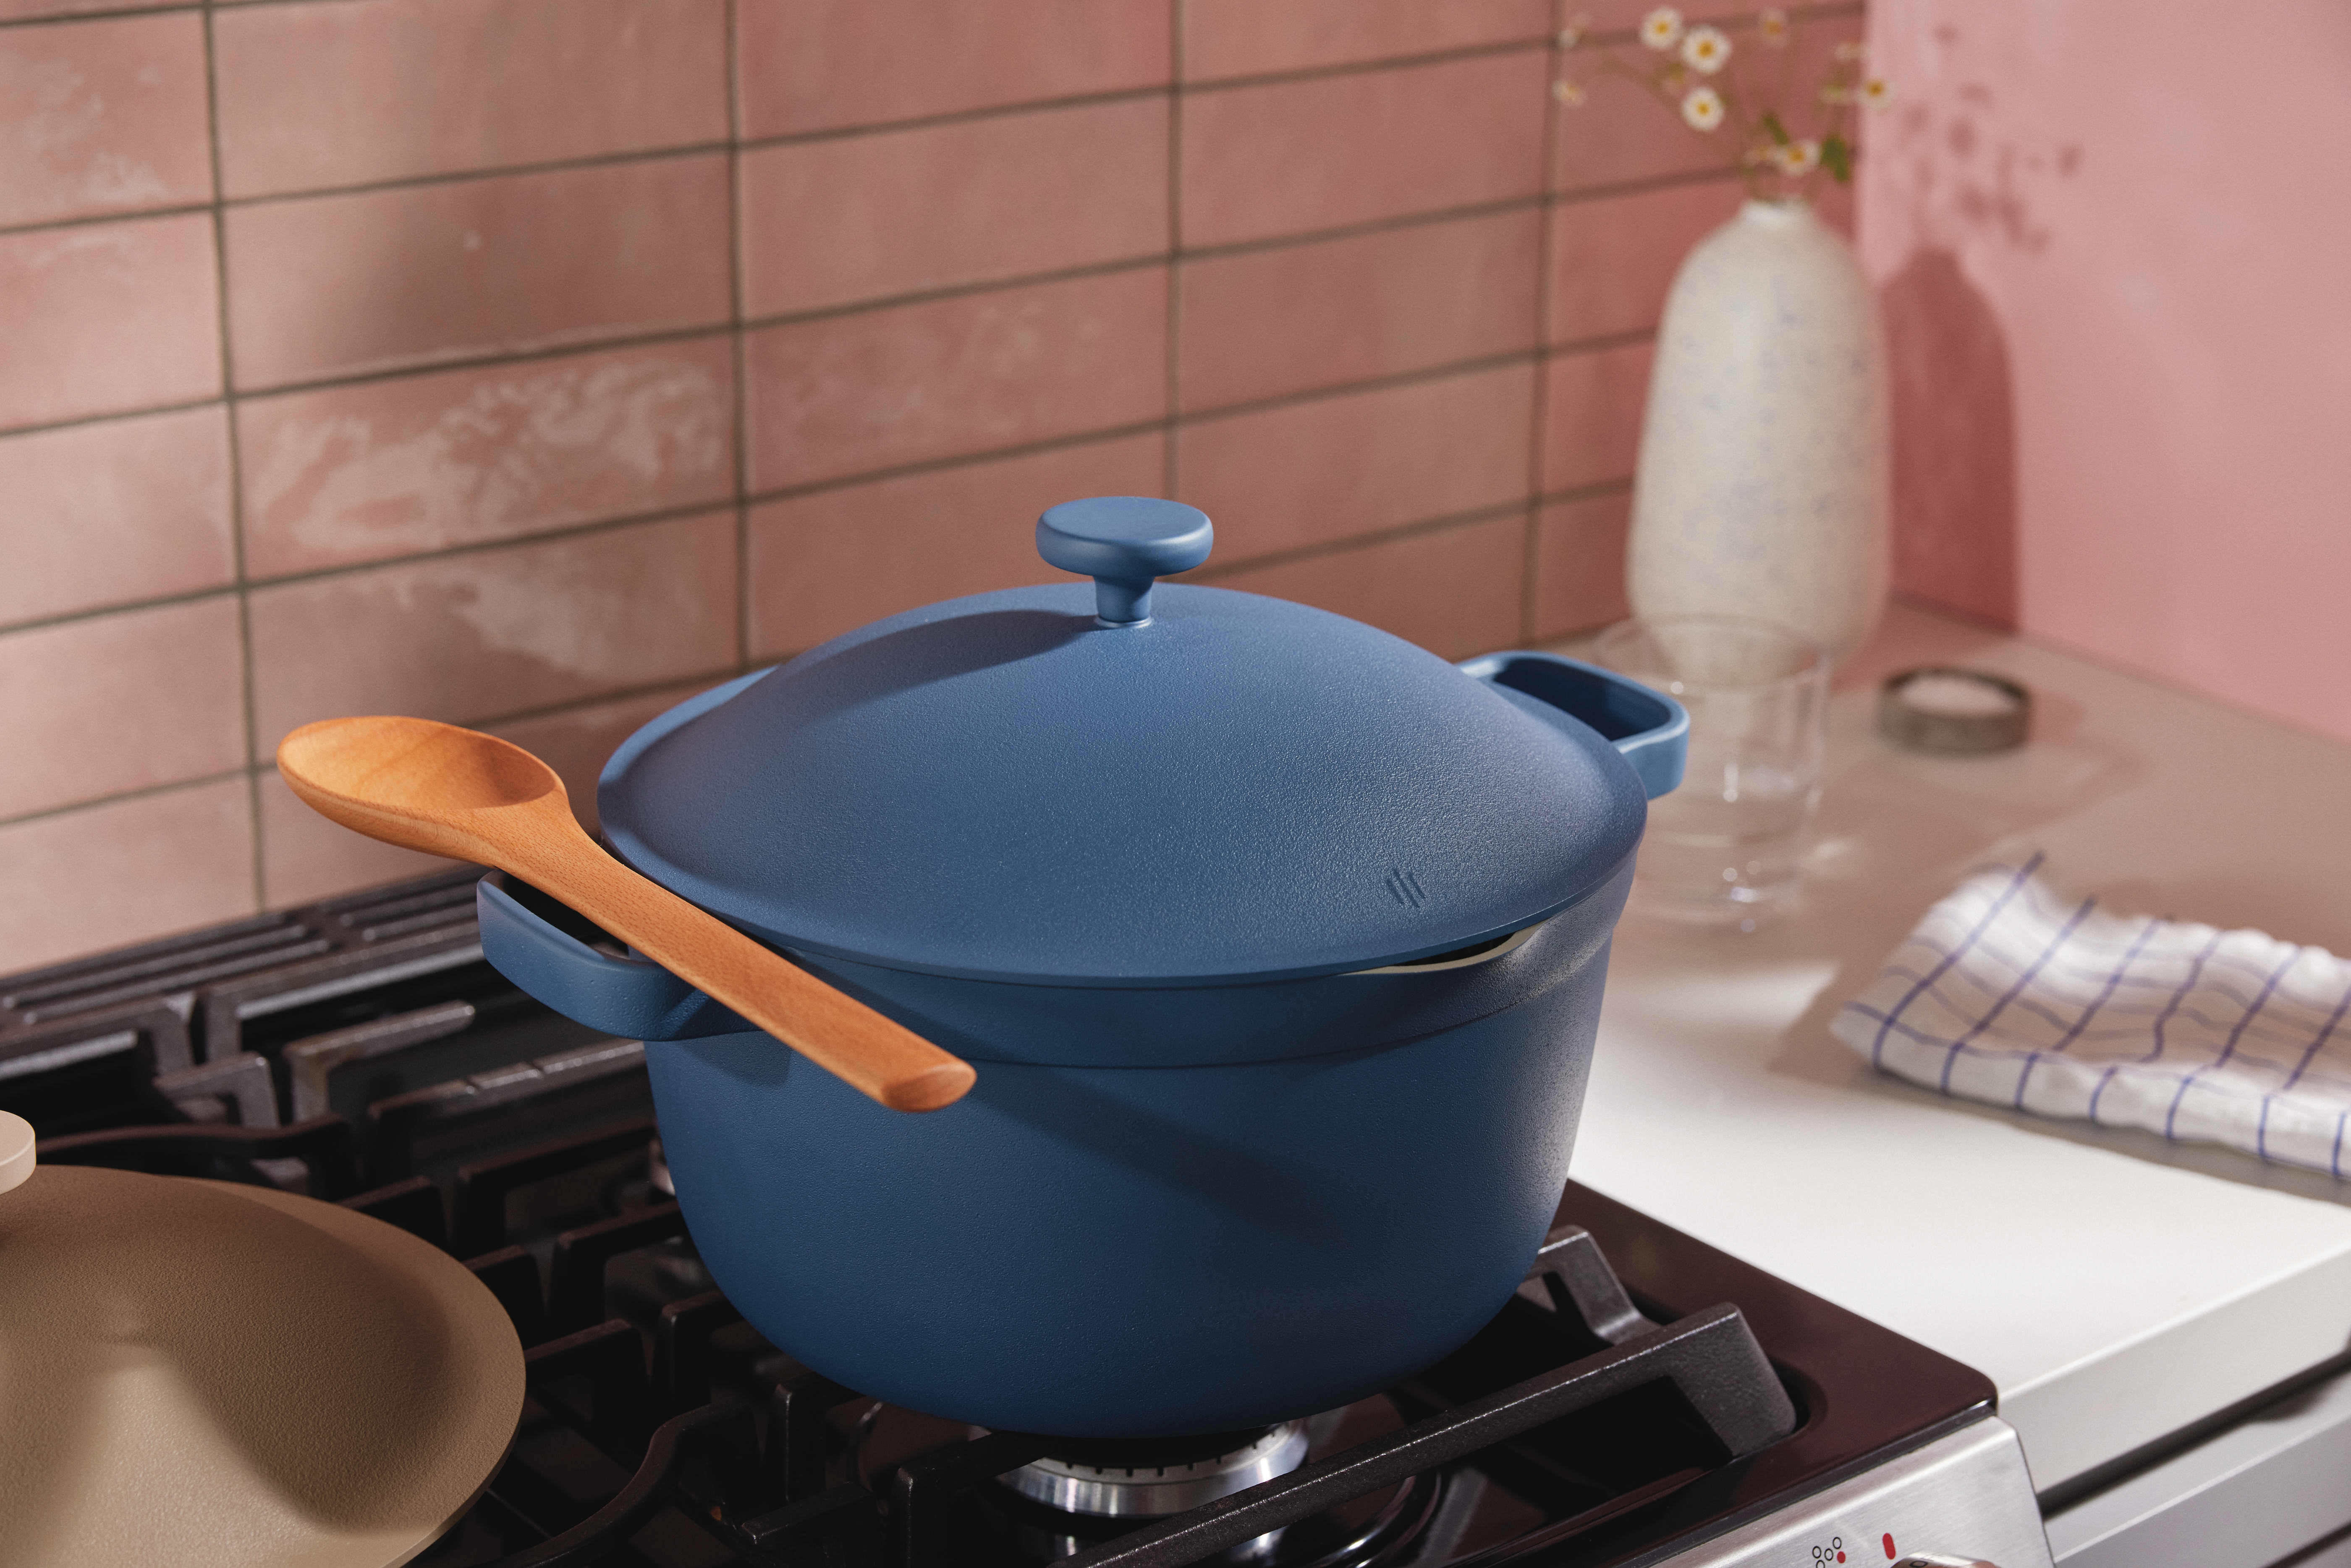 Perfect Pot: First-look review - Reviews